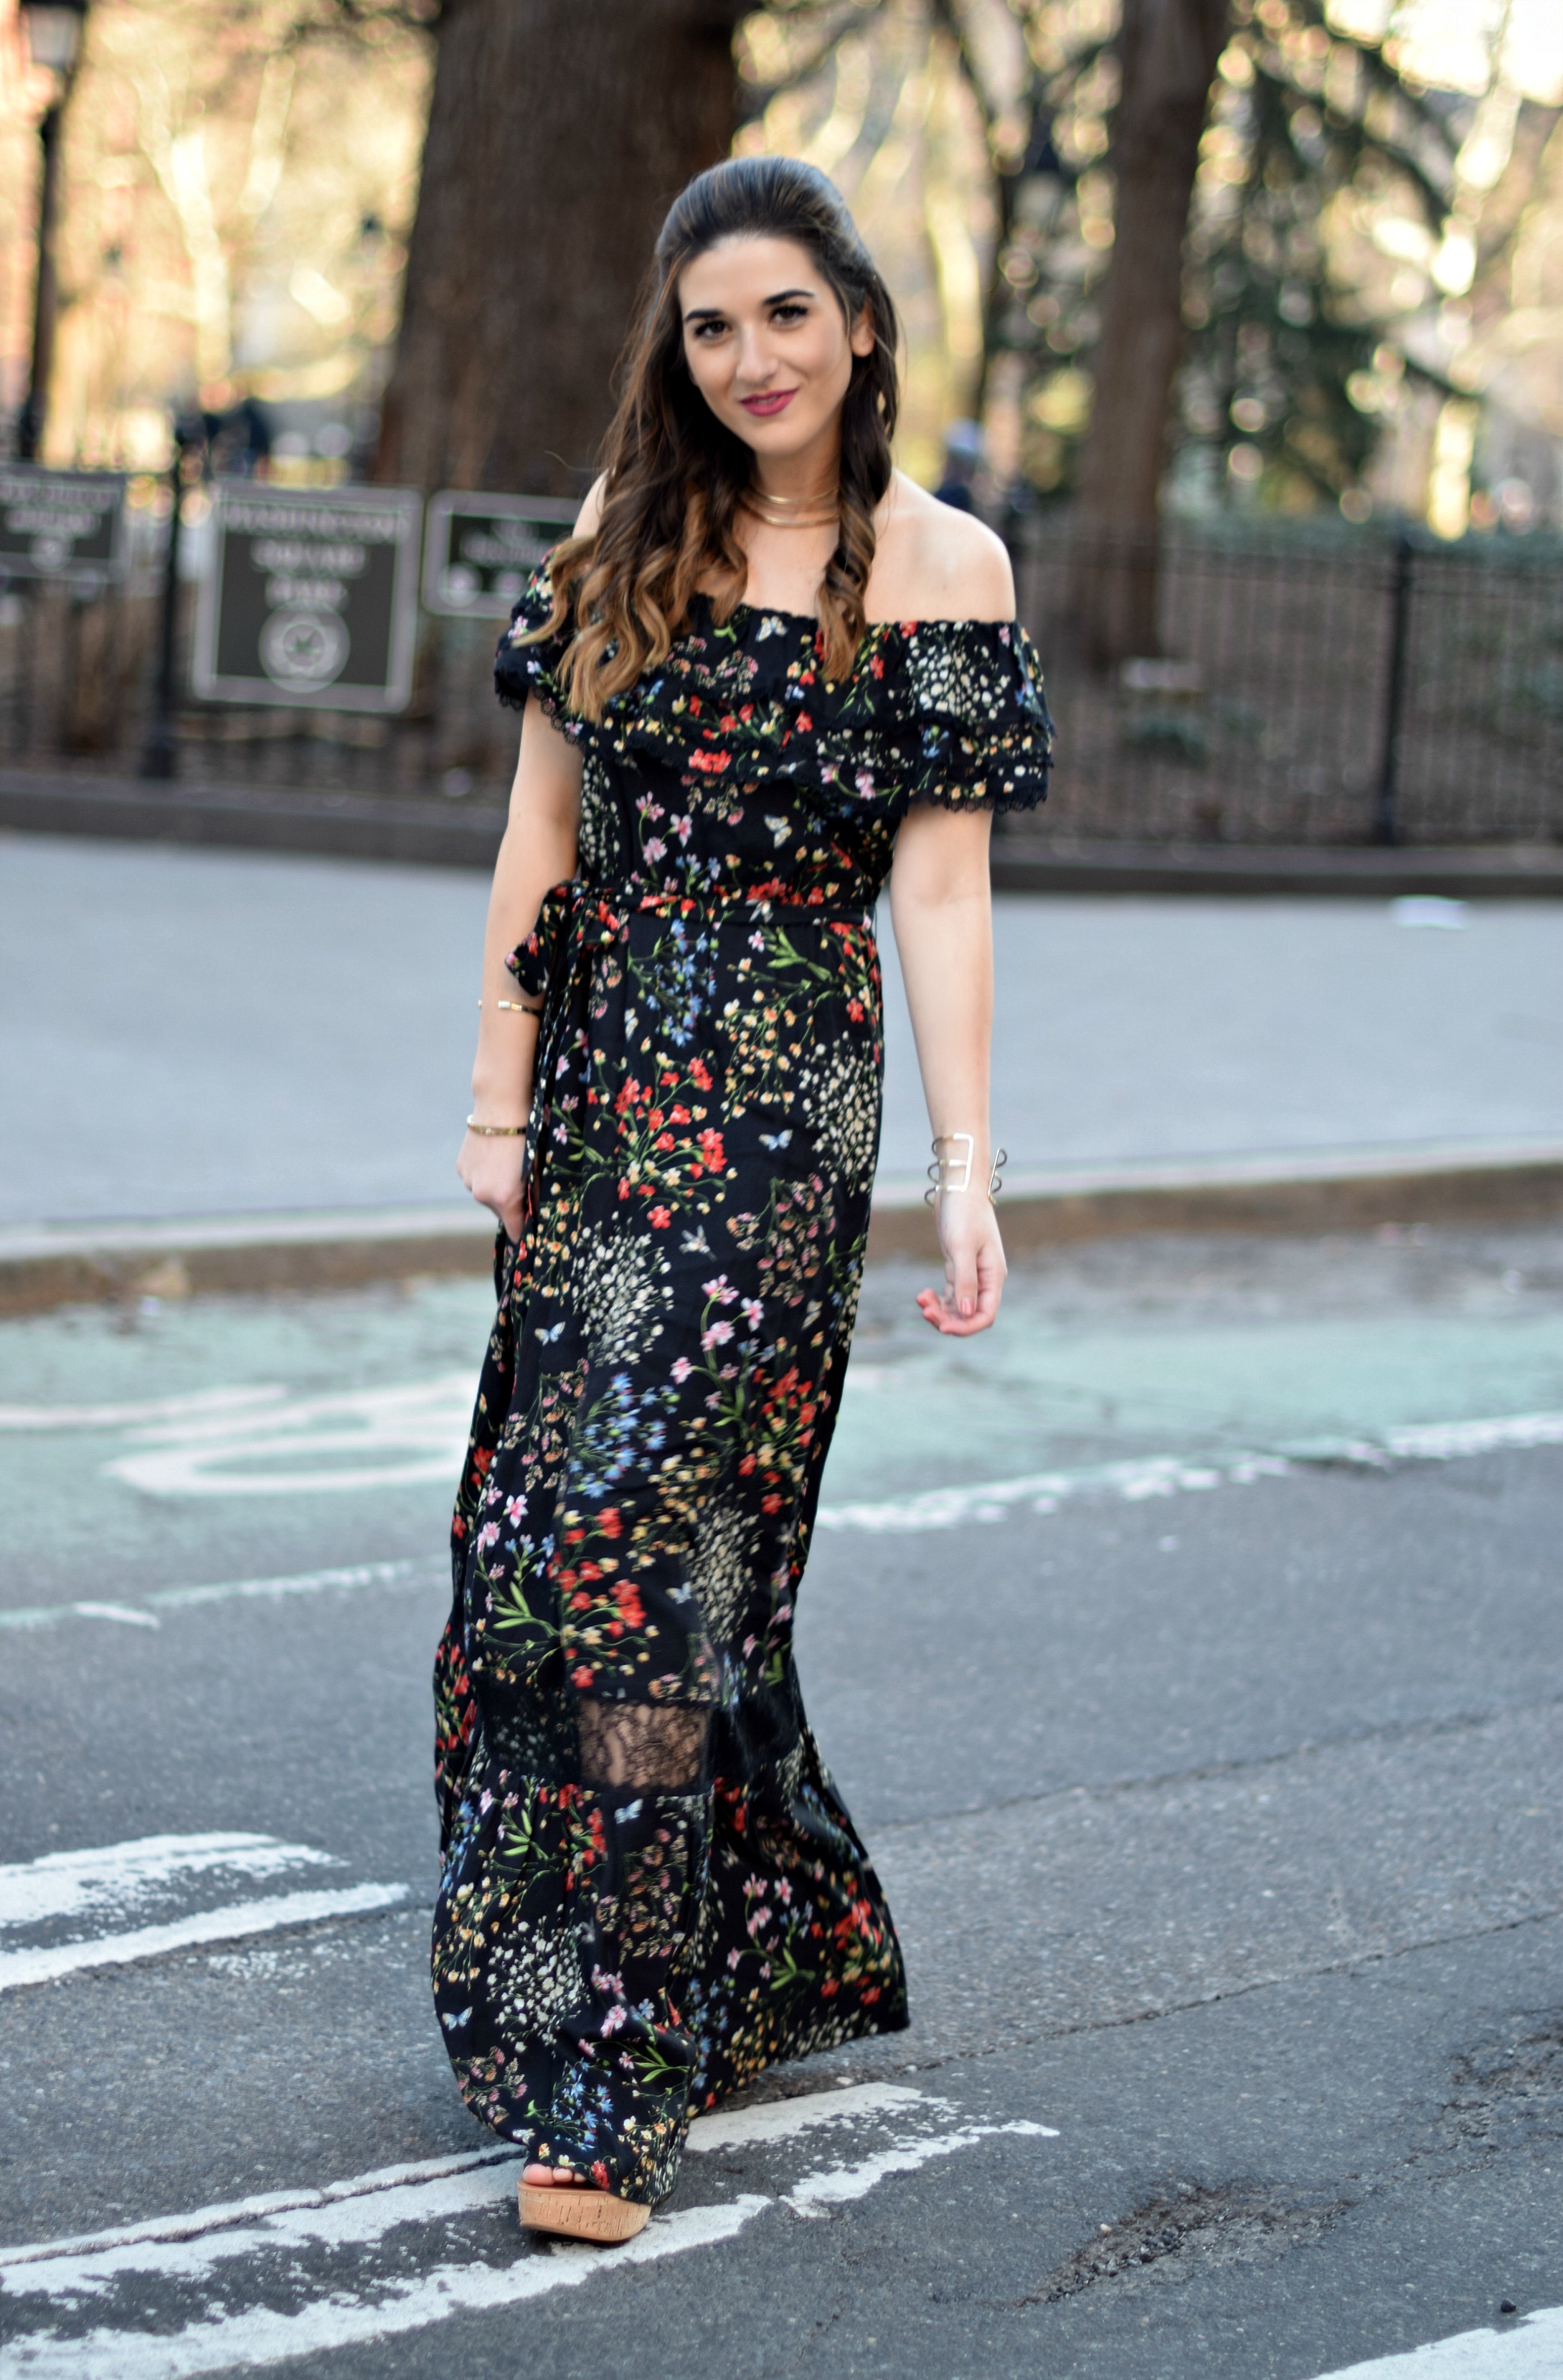 Alice Olivia Floral Dress Louboutins & Love Fashion Blog Esther Santer NYC Street Style Blogger Outfit OOTD Trunk Club Lydell Hair Brunette Model New York City Photoshoot Spring Summer Choker Gold Jewelry Bracelet Pretty Beautiful Inspo Shoulder Shoes.jpg